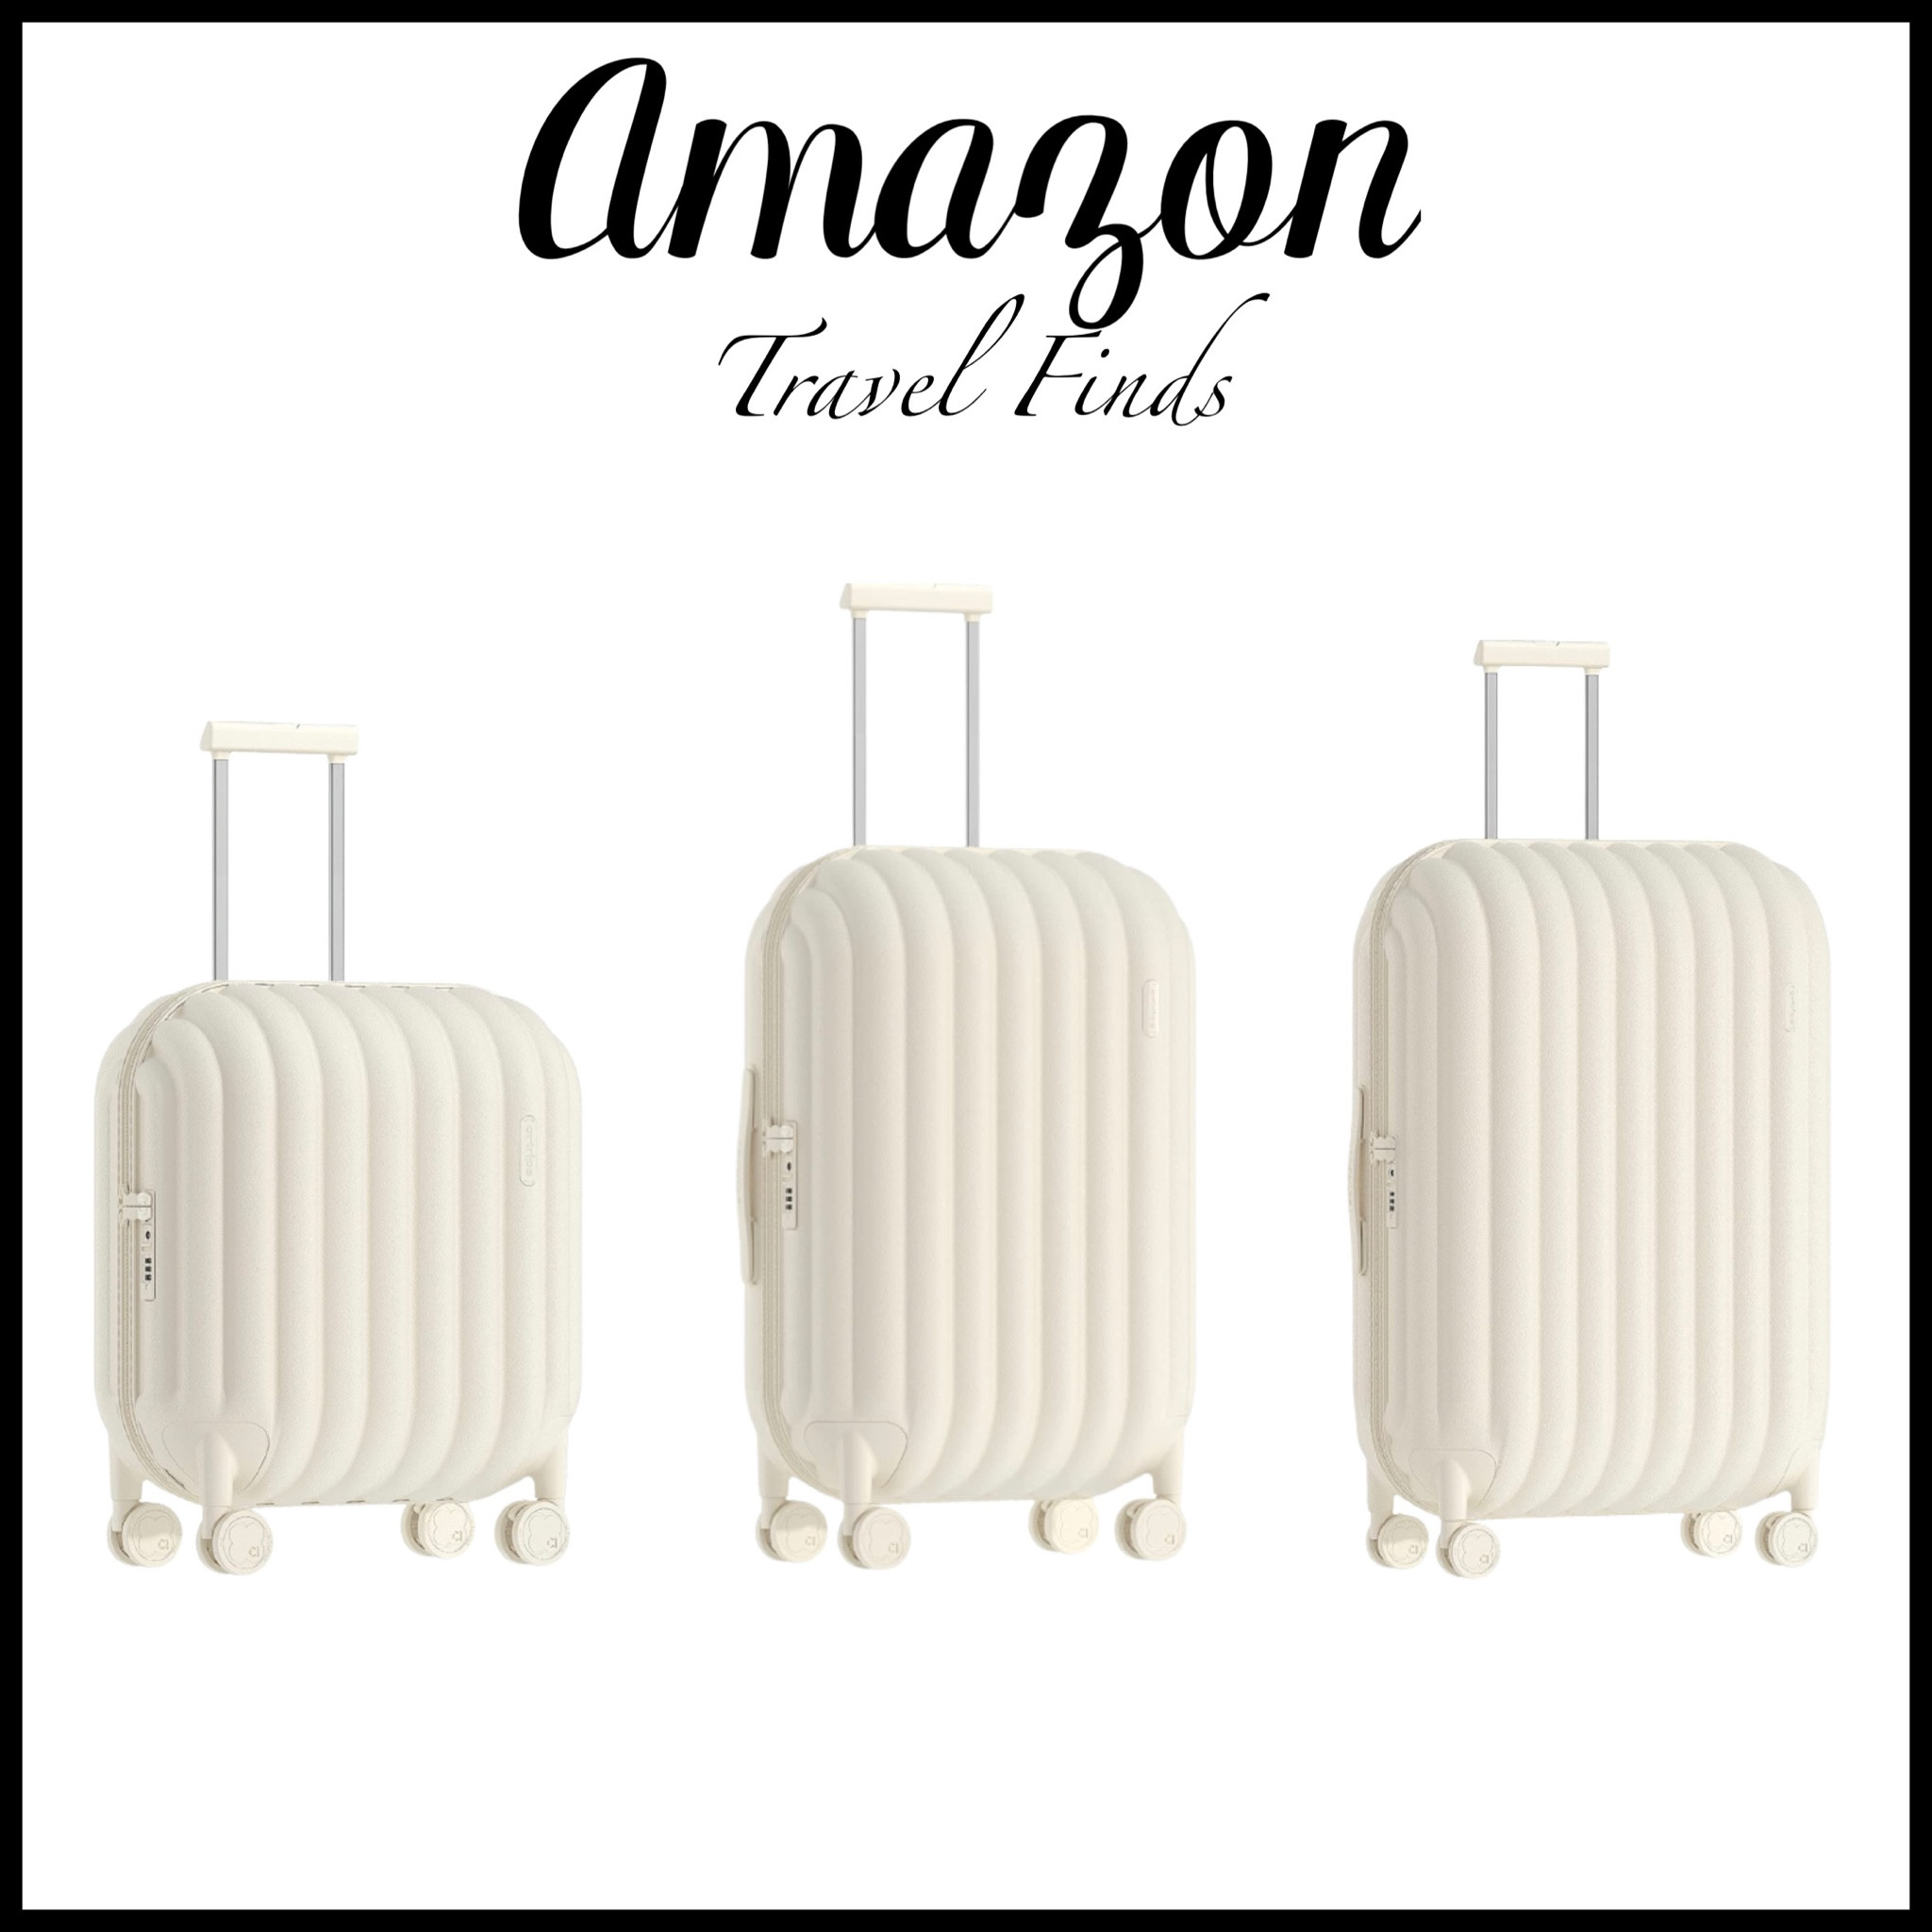 Artrips Hardside Luggage Set: The Perfect Travel Partner for Modern Moms!